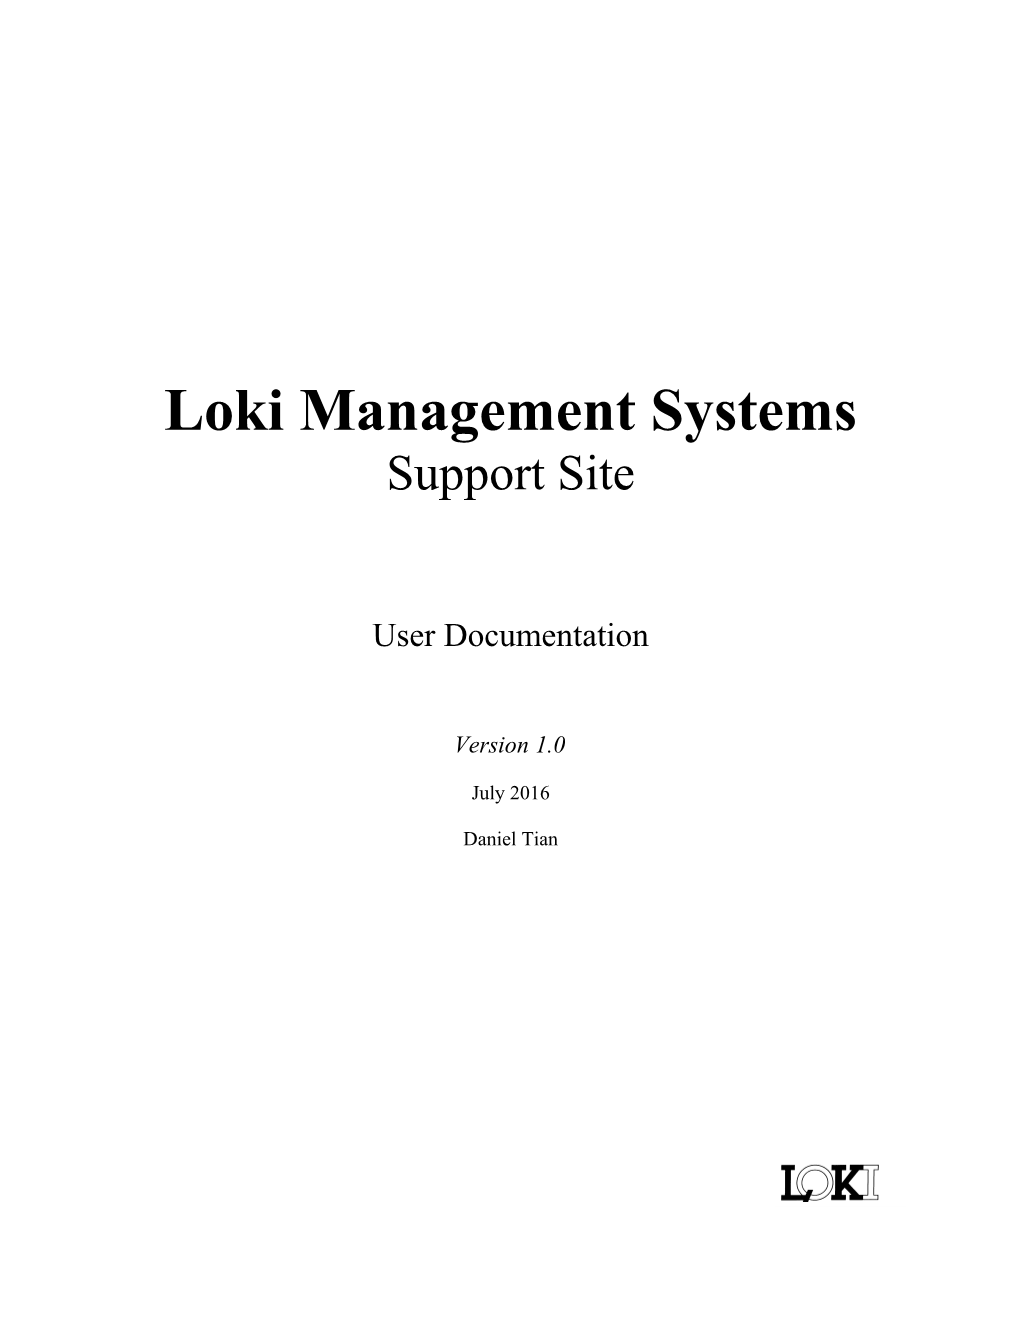 LOKI Support Site: User Guide